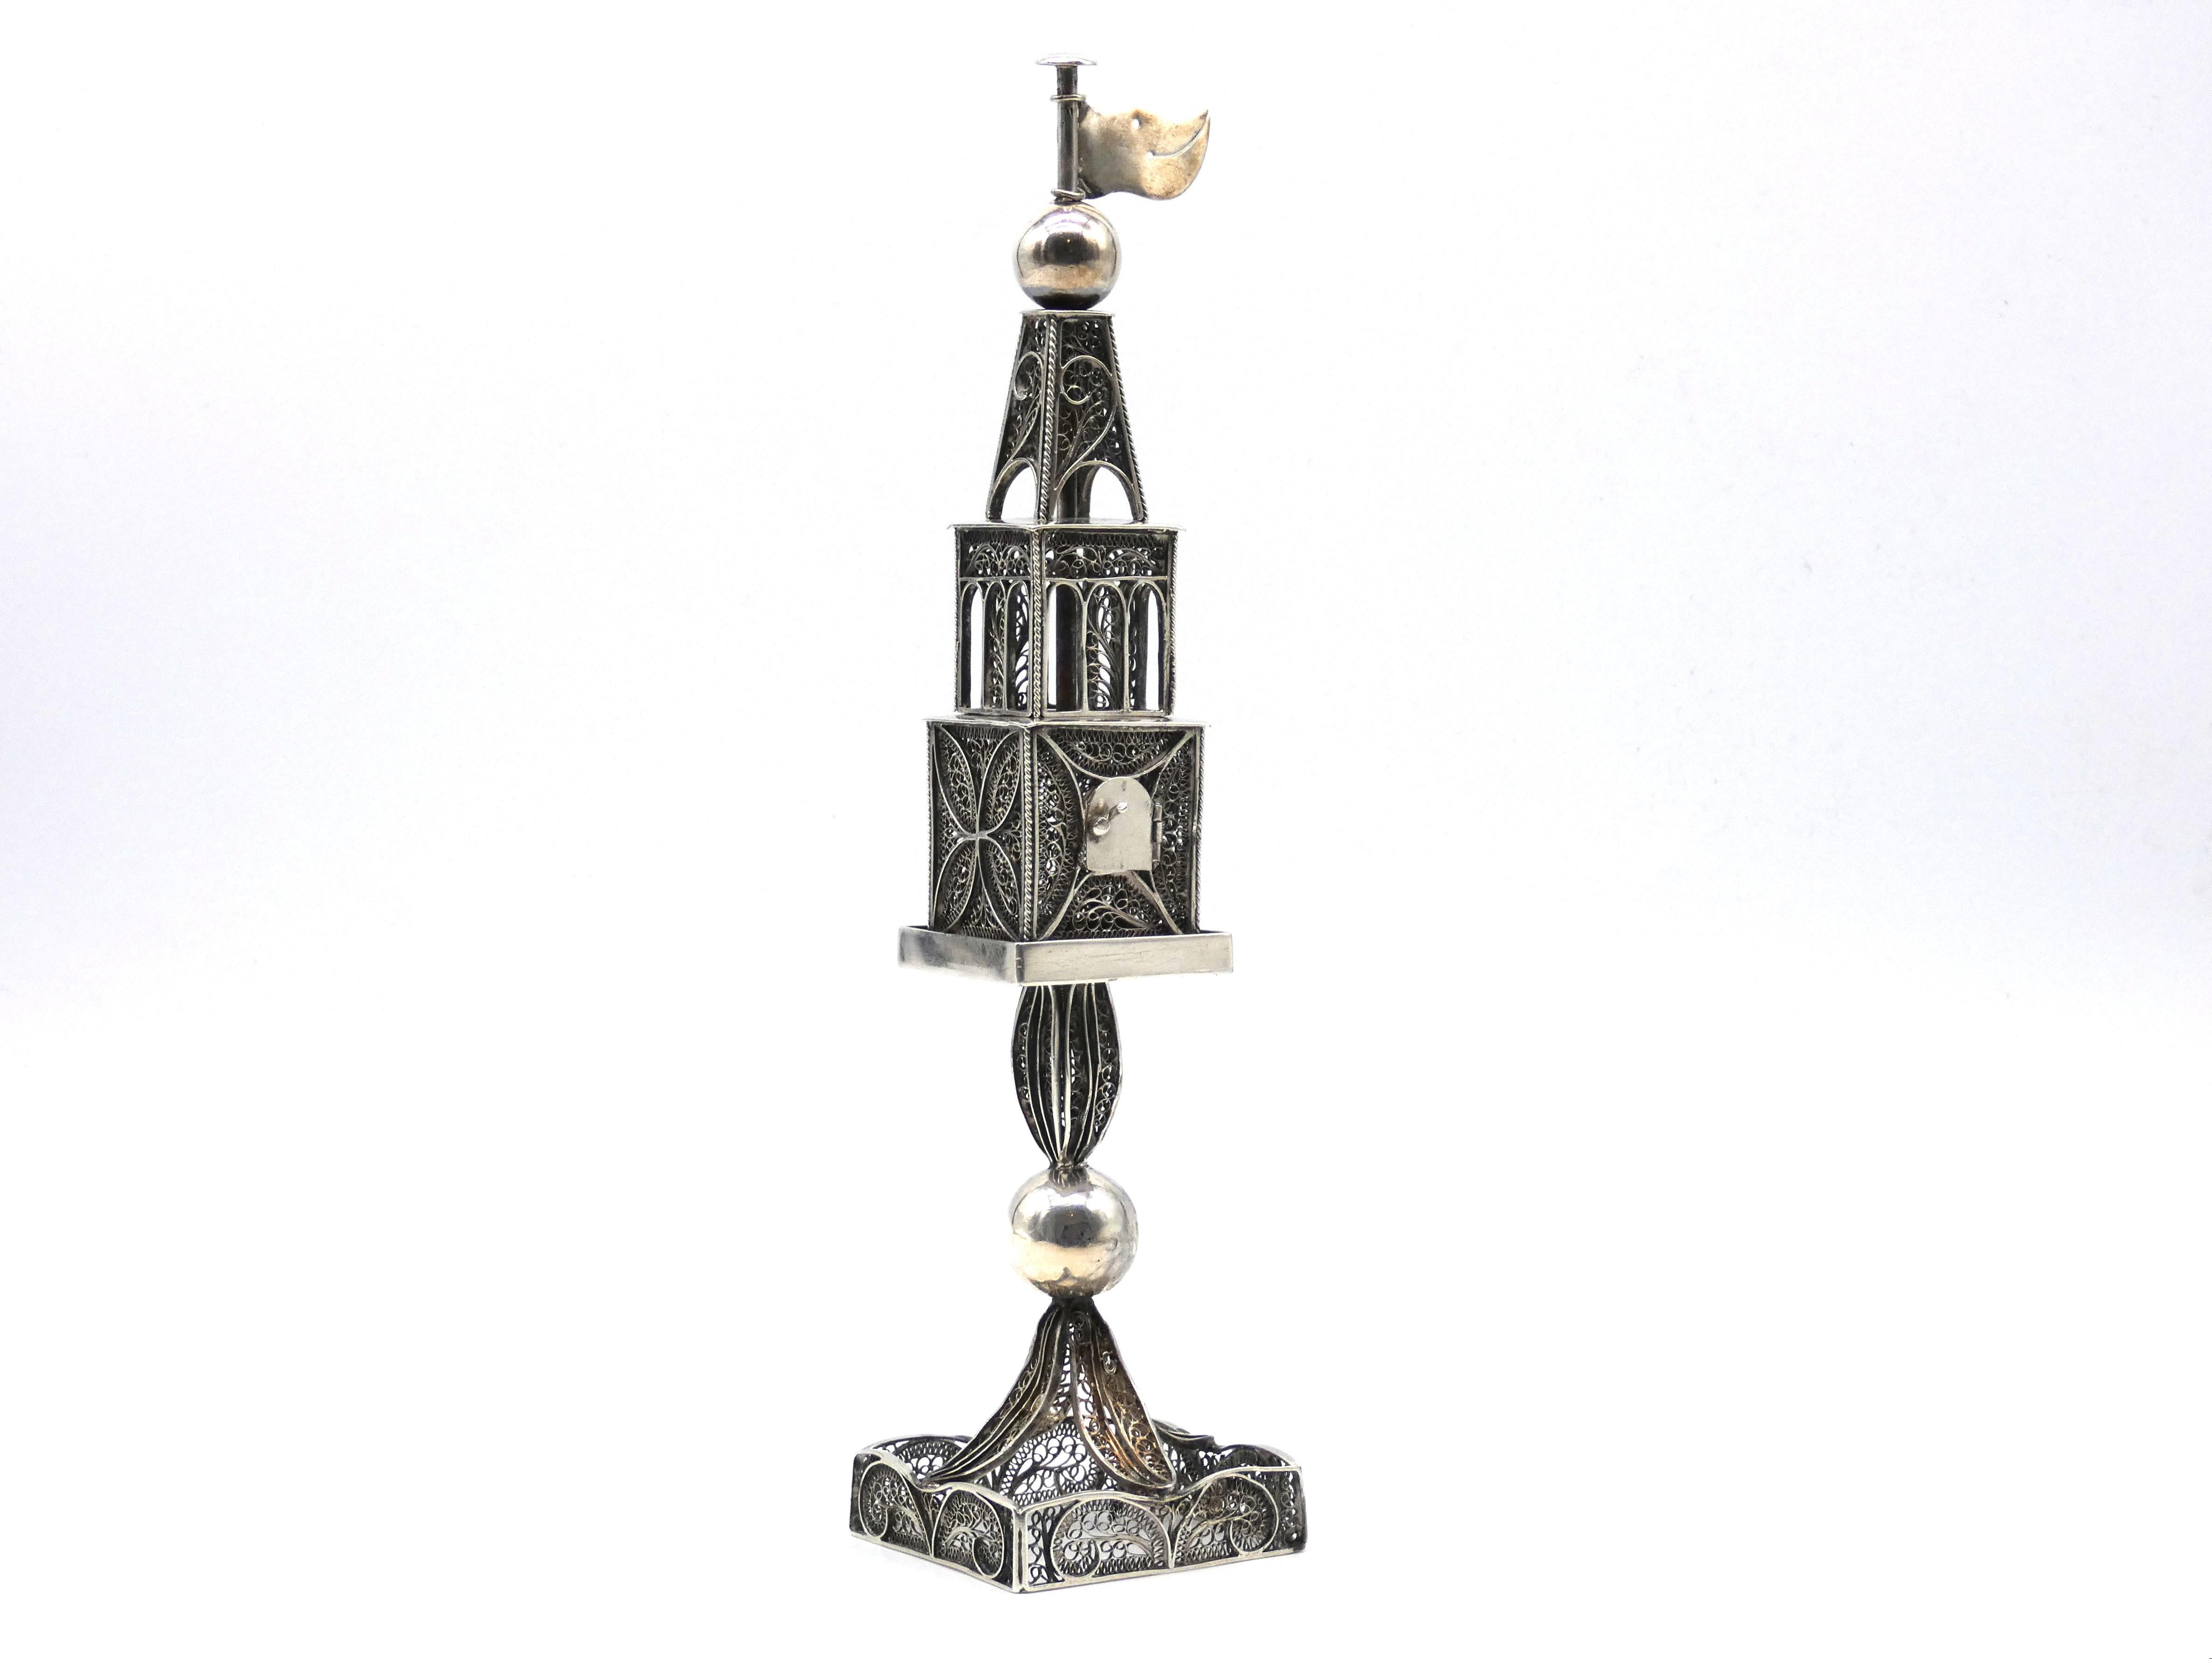 Spice tower has a square base with a filigree leaf designed stem branching upward and encompassed with a ball in center. Spice container is square shaped with a floral design in the filigree and has an arched shaped opening doorway for refilling the